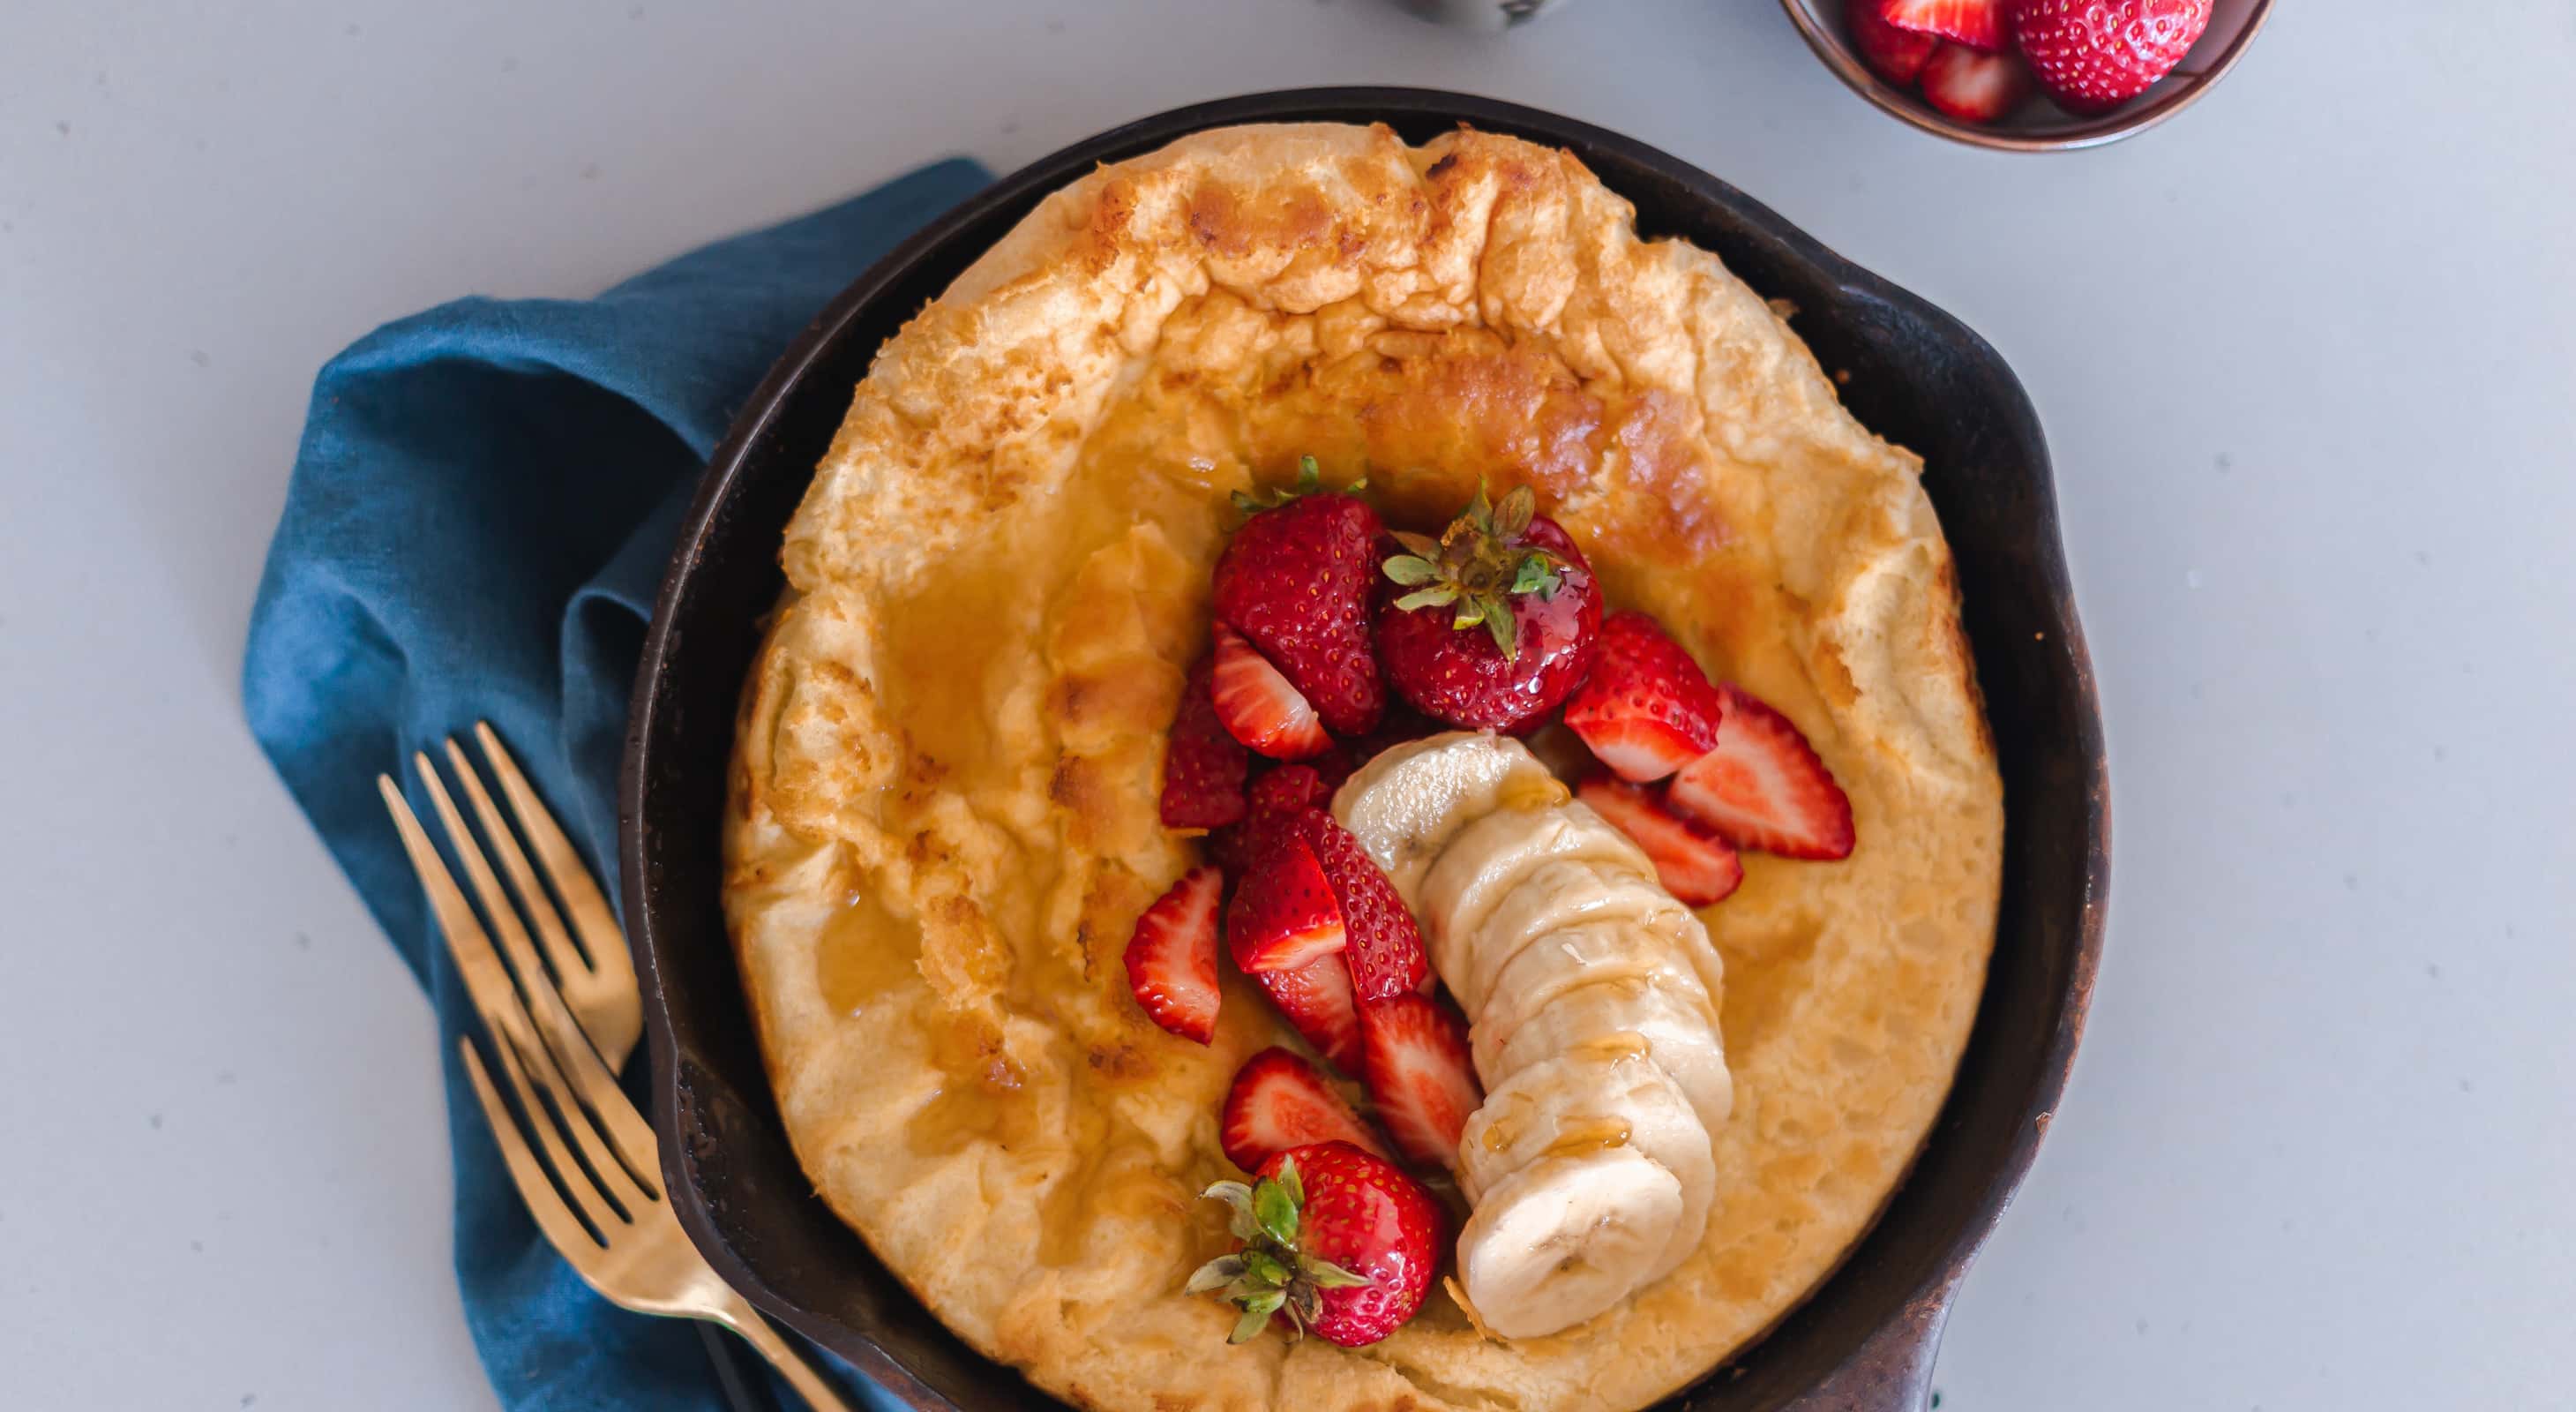 Puffed pancake in a cast iron skillet served with berries and banana